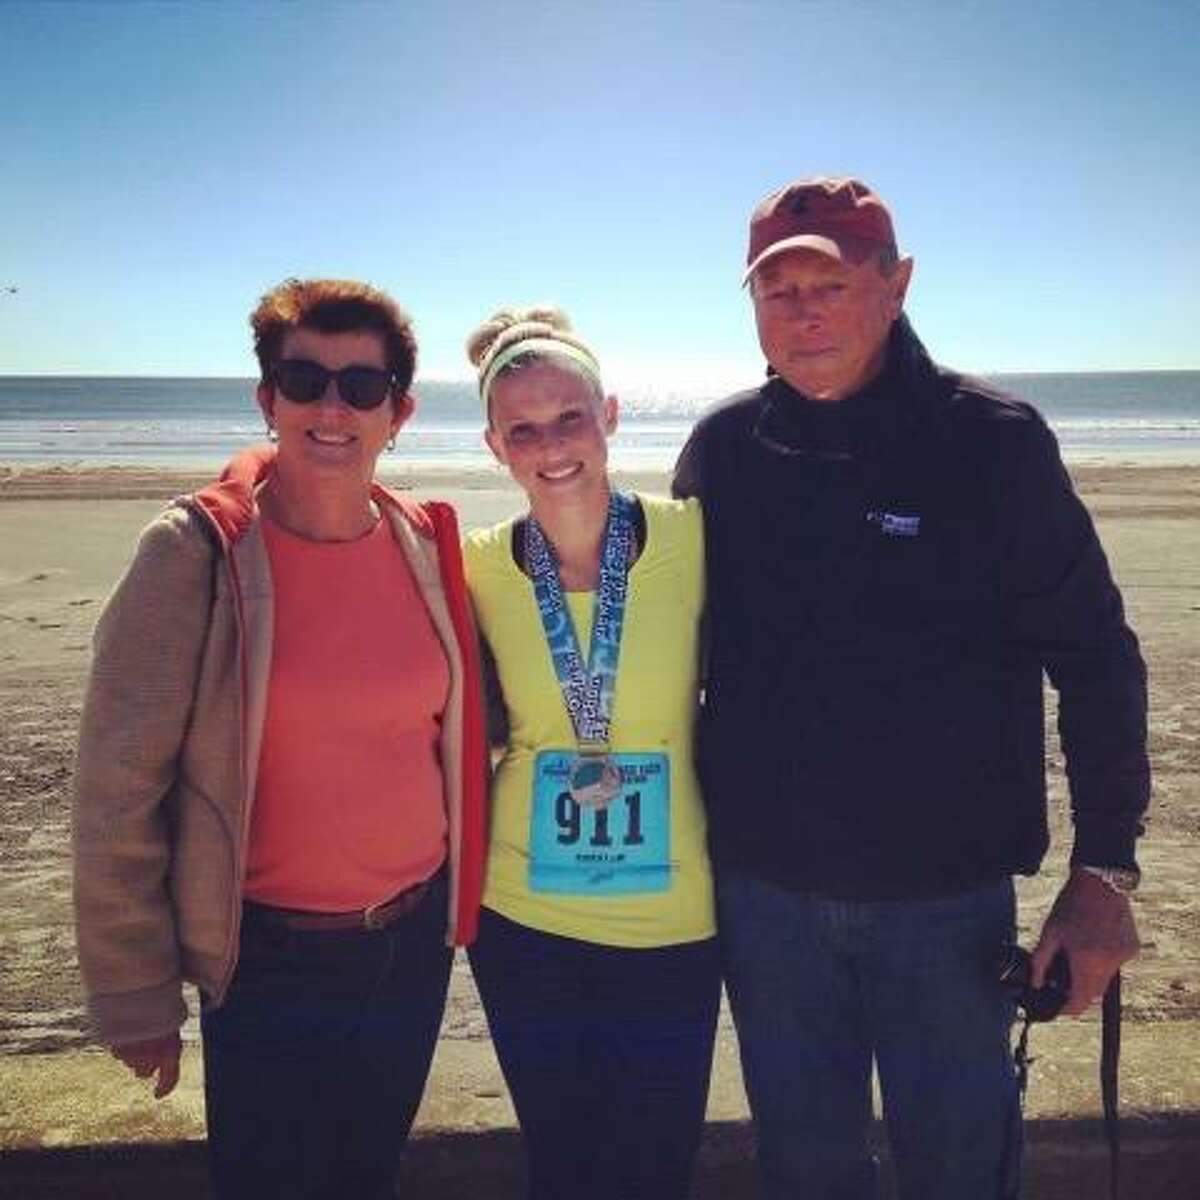 Lea Aruilio, center, with her mother Cindy Swanson and father Eric Swanson at the 2014 Newport Marathon.